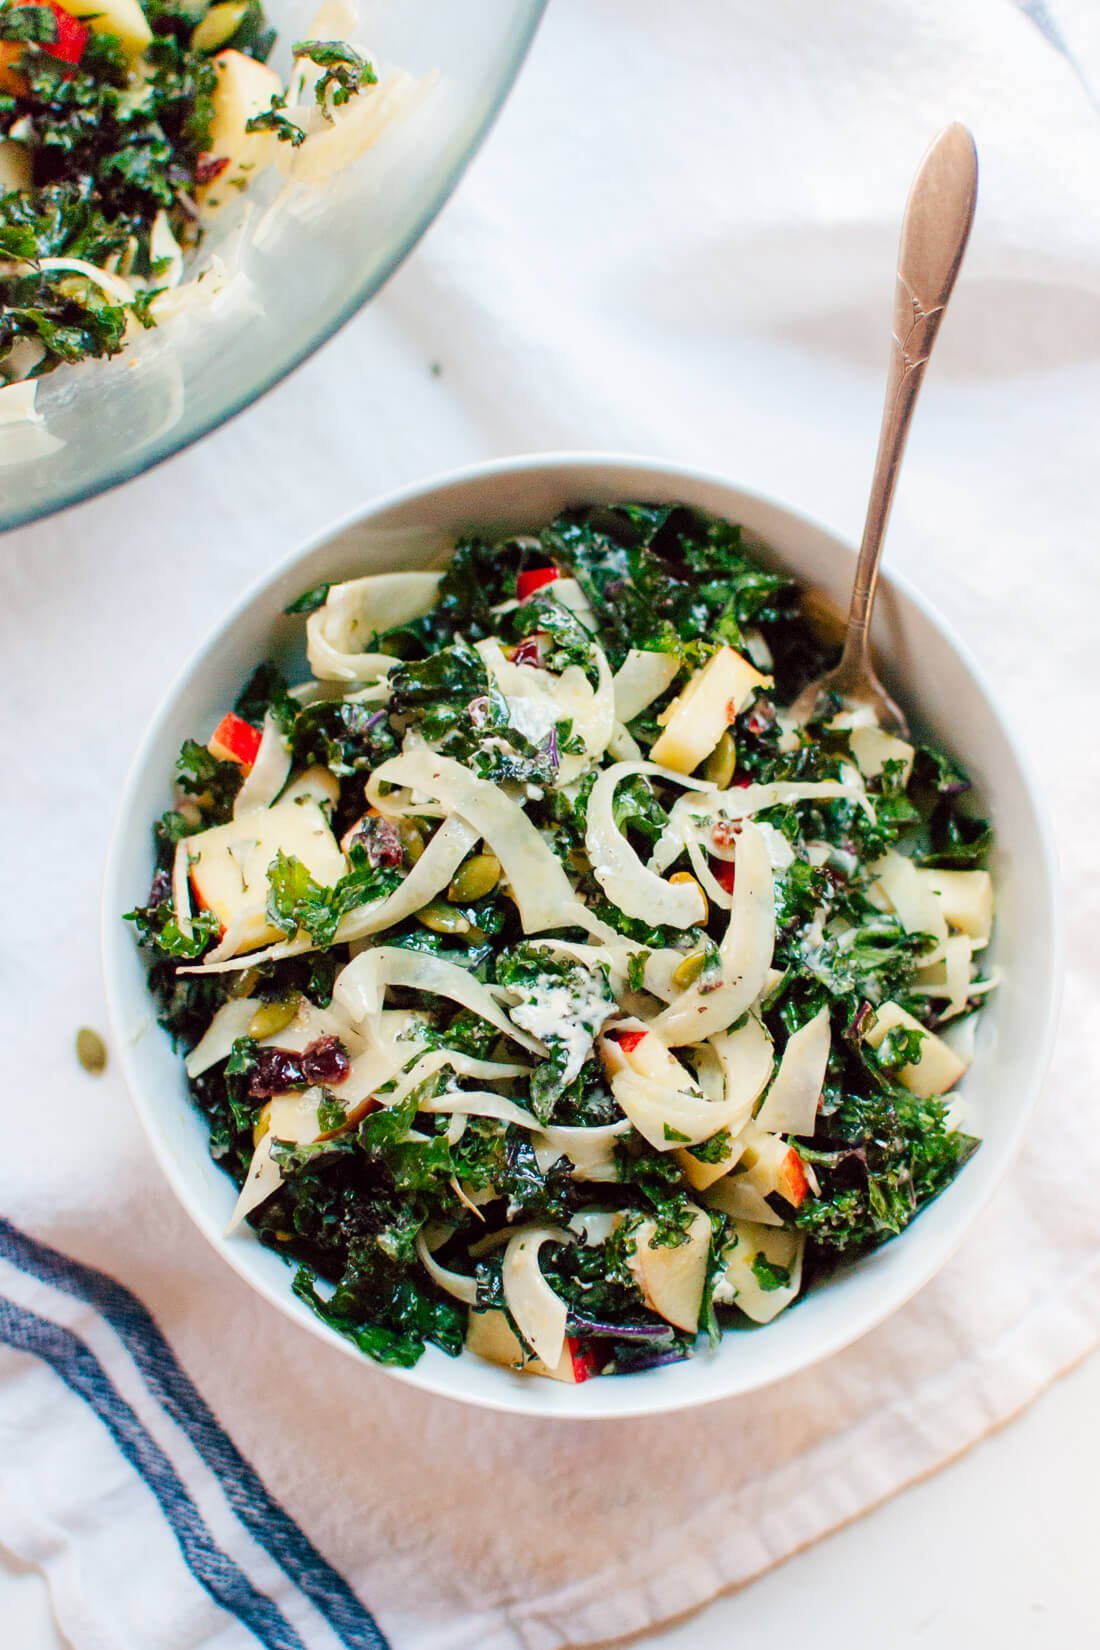 Autumn Kale Salad with Fennel, Honeycrisp and Goat Cheese